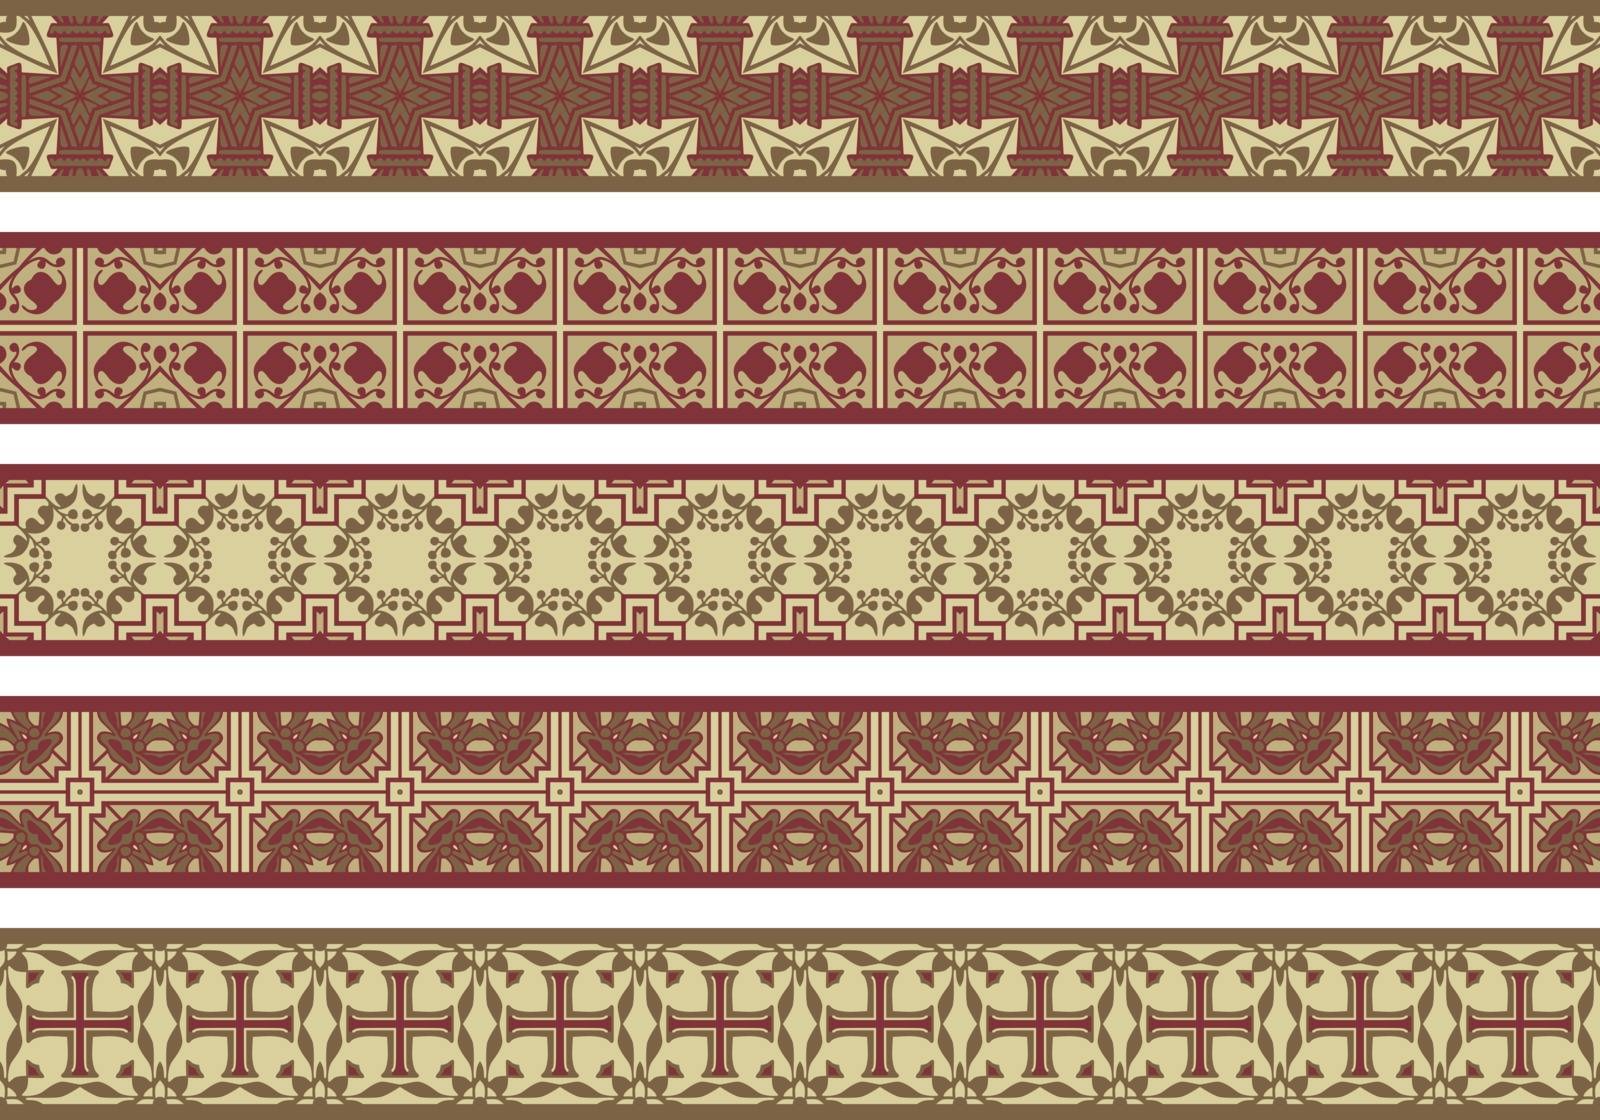 Set of five illustrated decorative borders made of abstract elements in yellow, dark red and brown